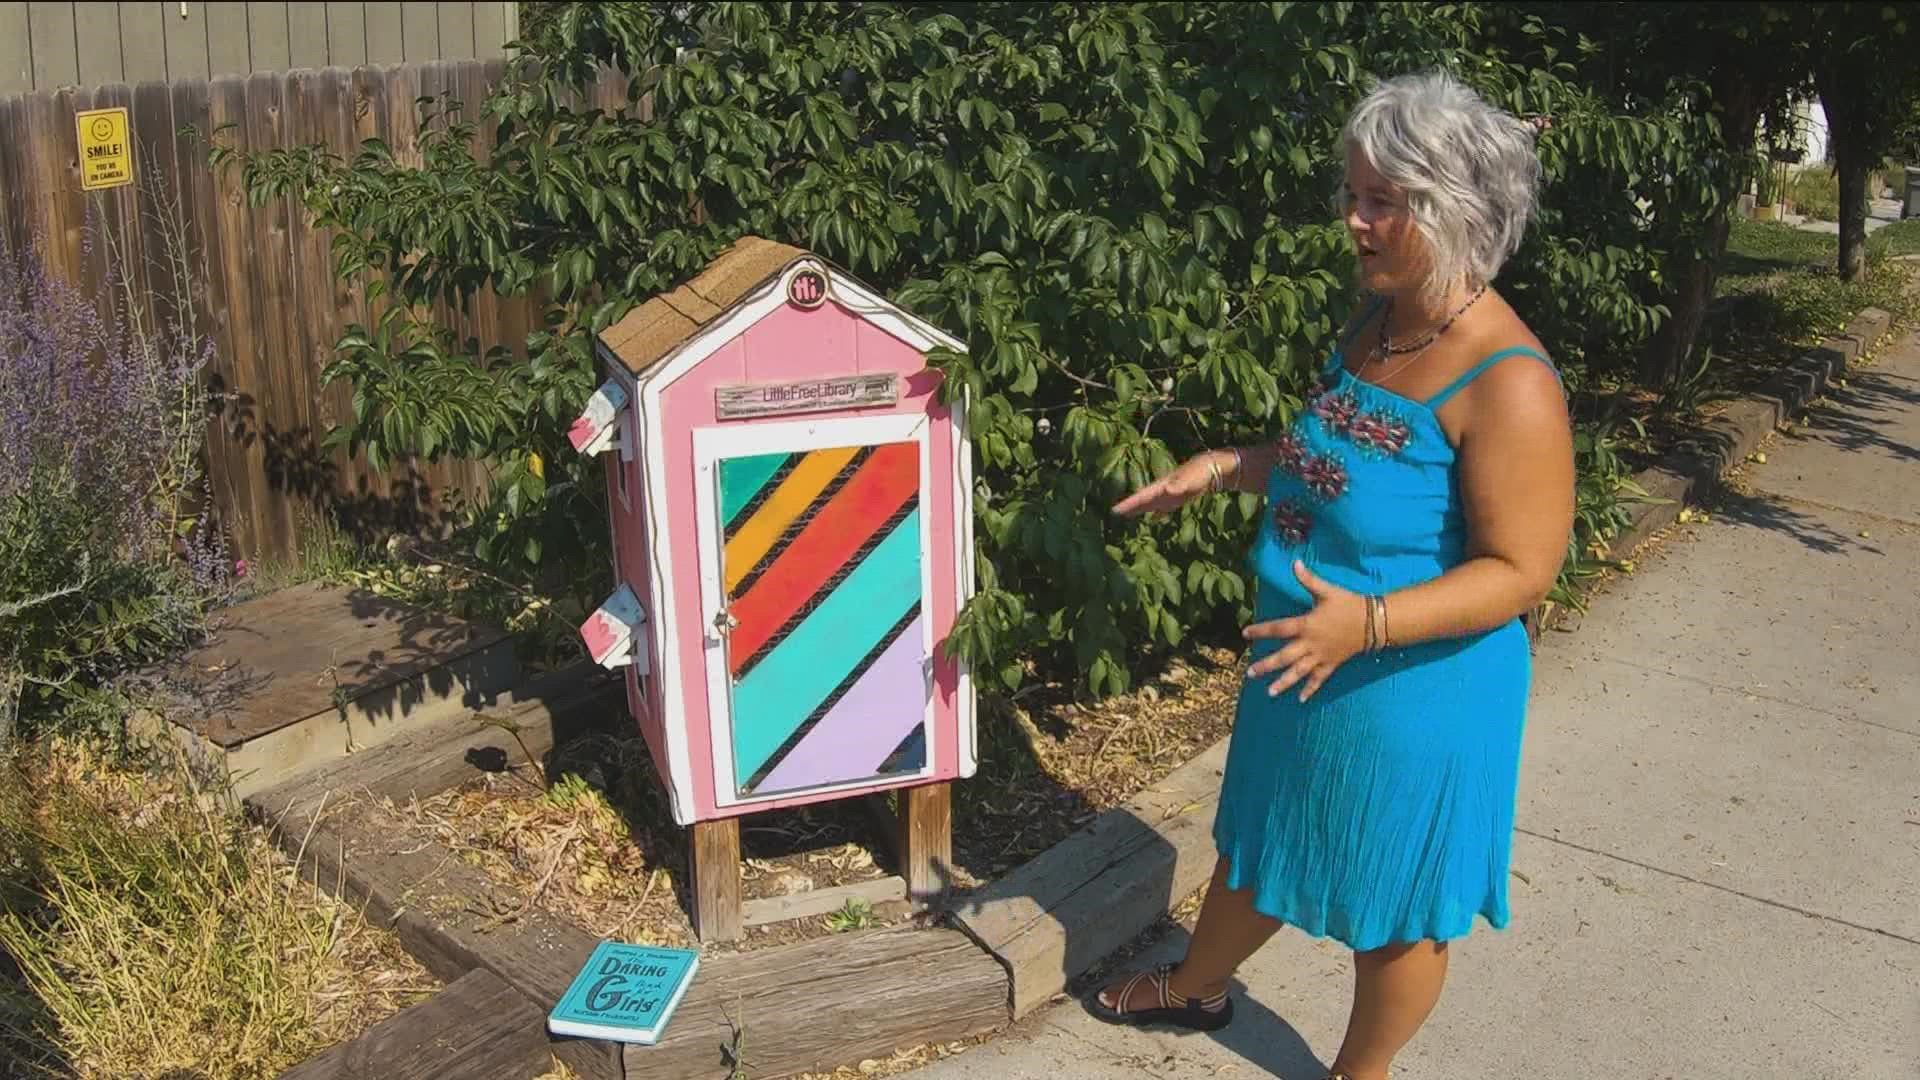 "We're often overflowing with books," Amy Brown, the creator of the free little library, said. "Like I have a huge extra shelf in my garage full of books."